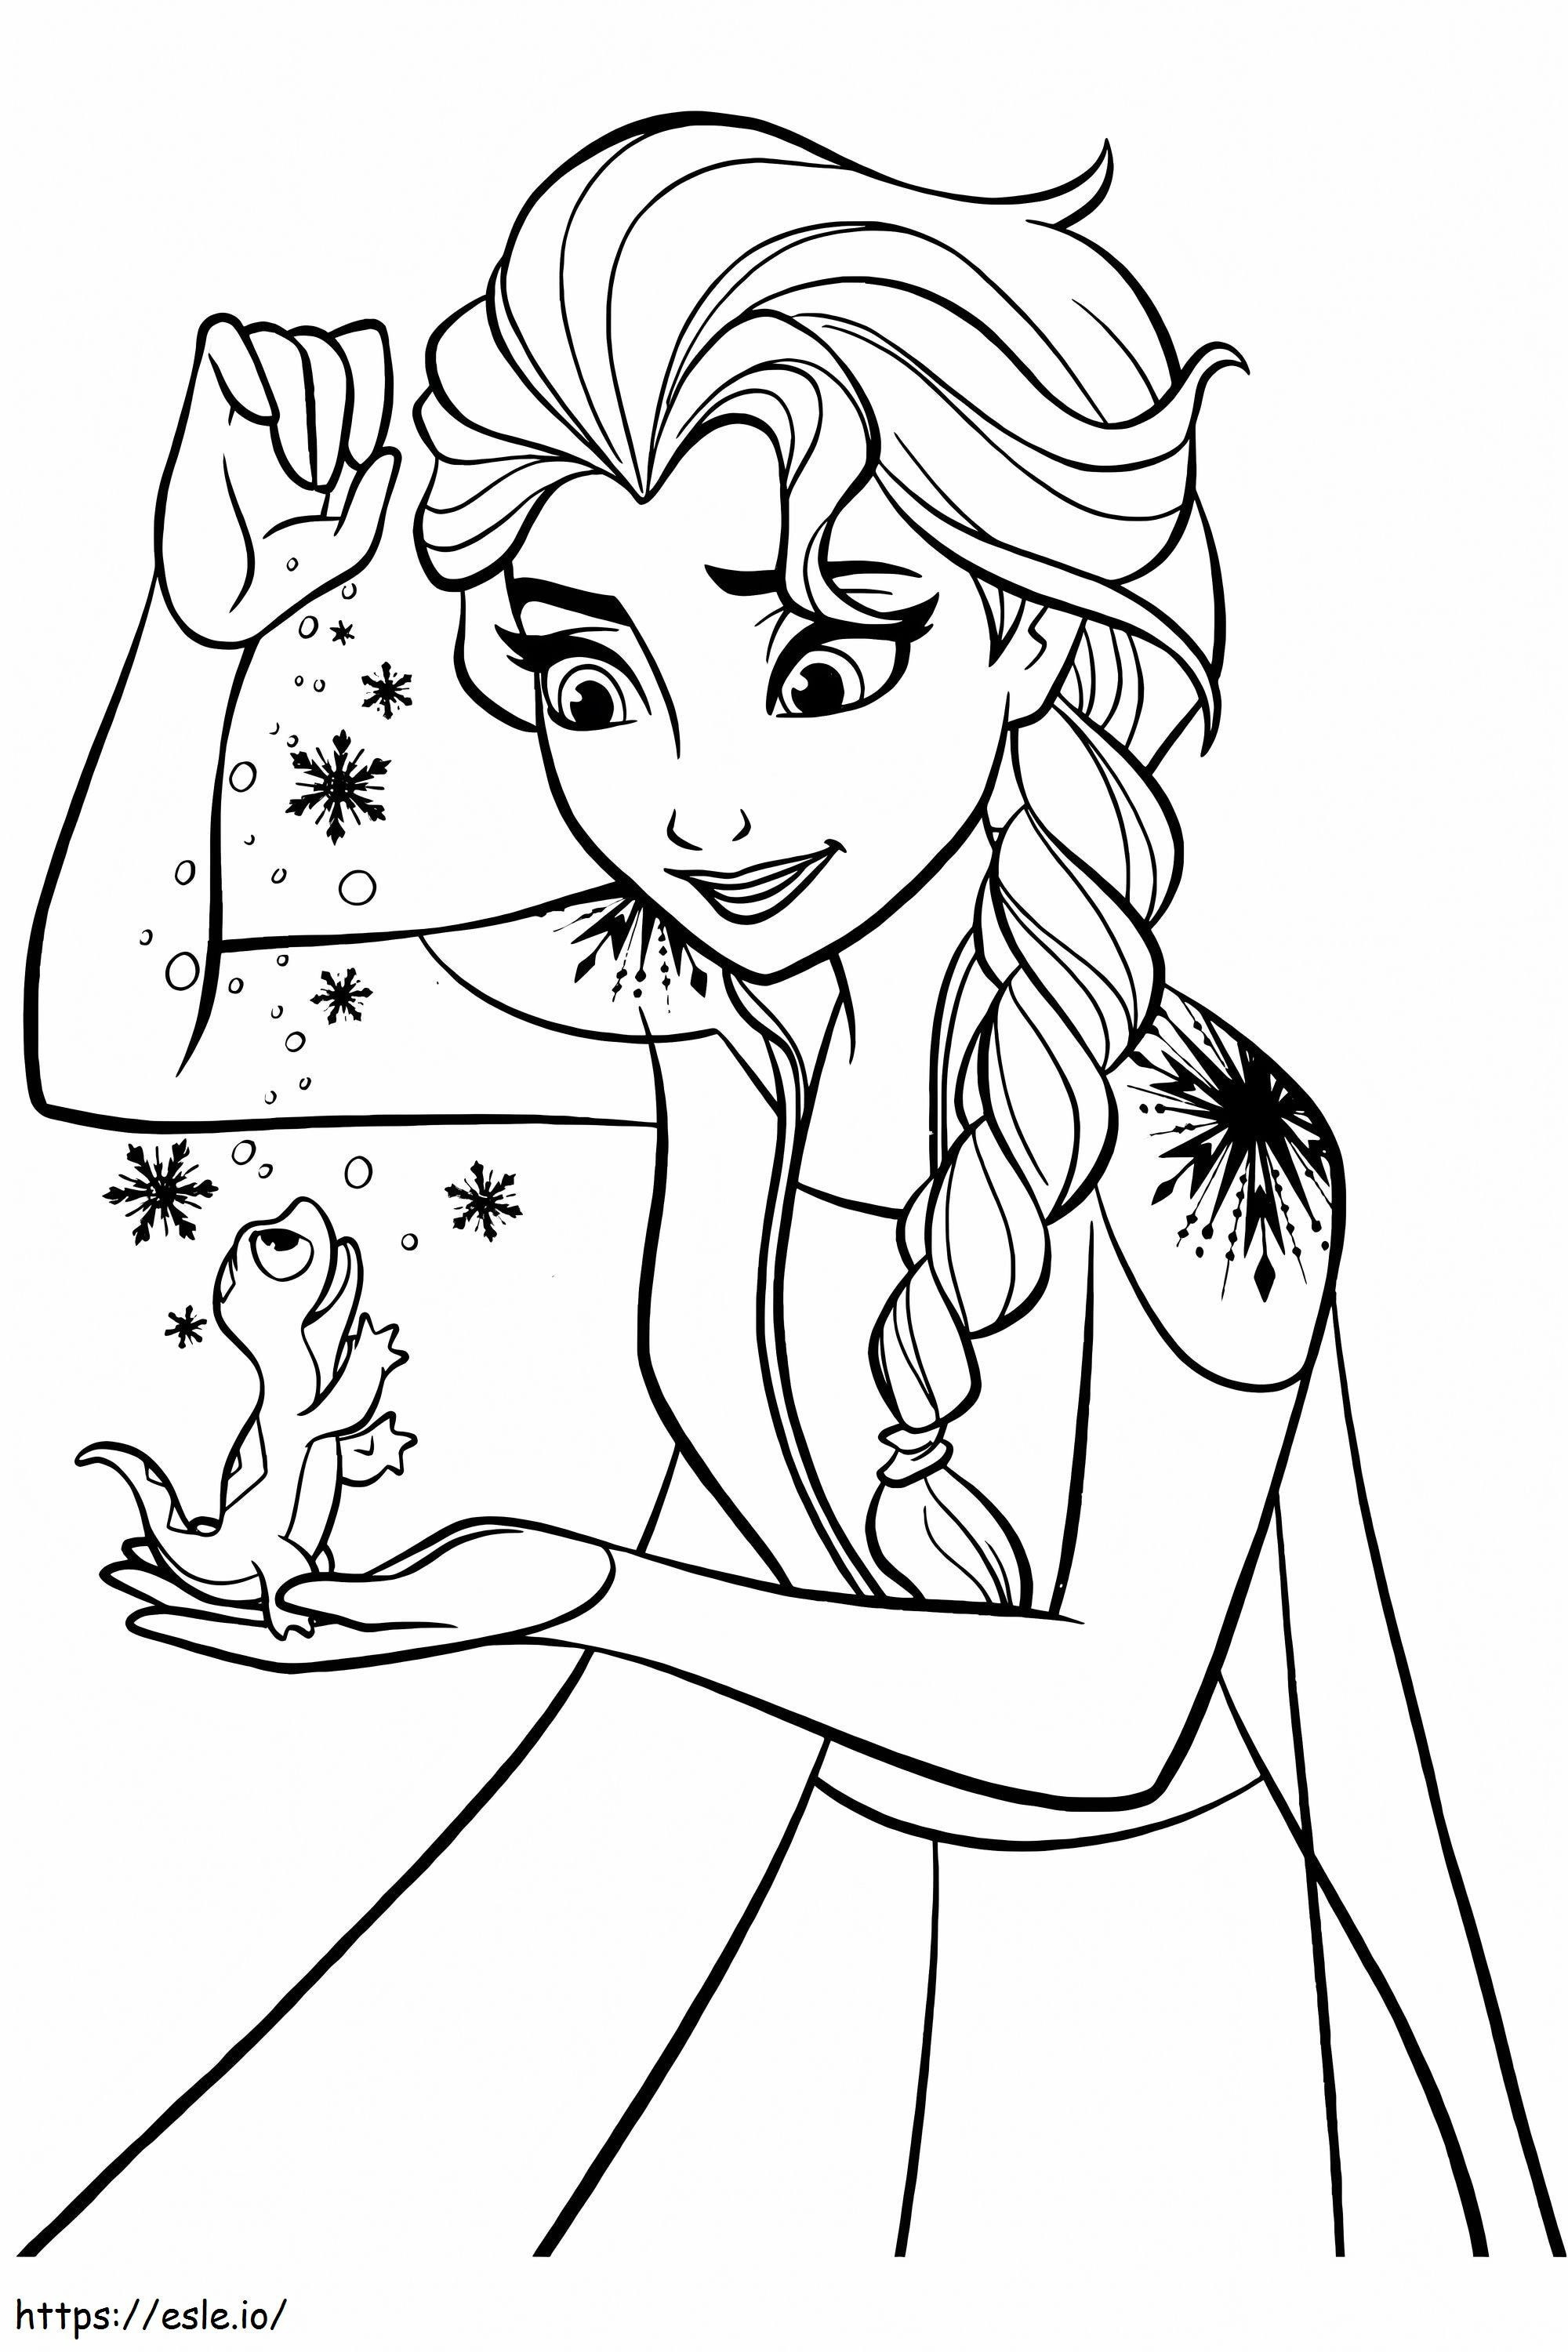 Elsa And Bruni coloring page